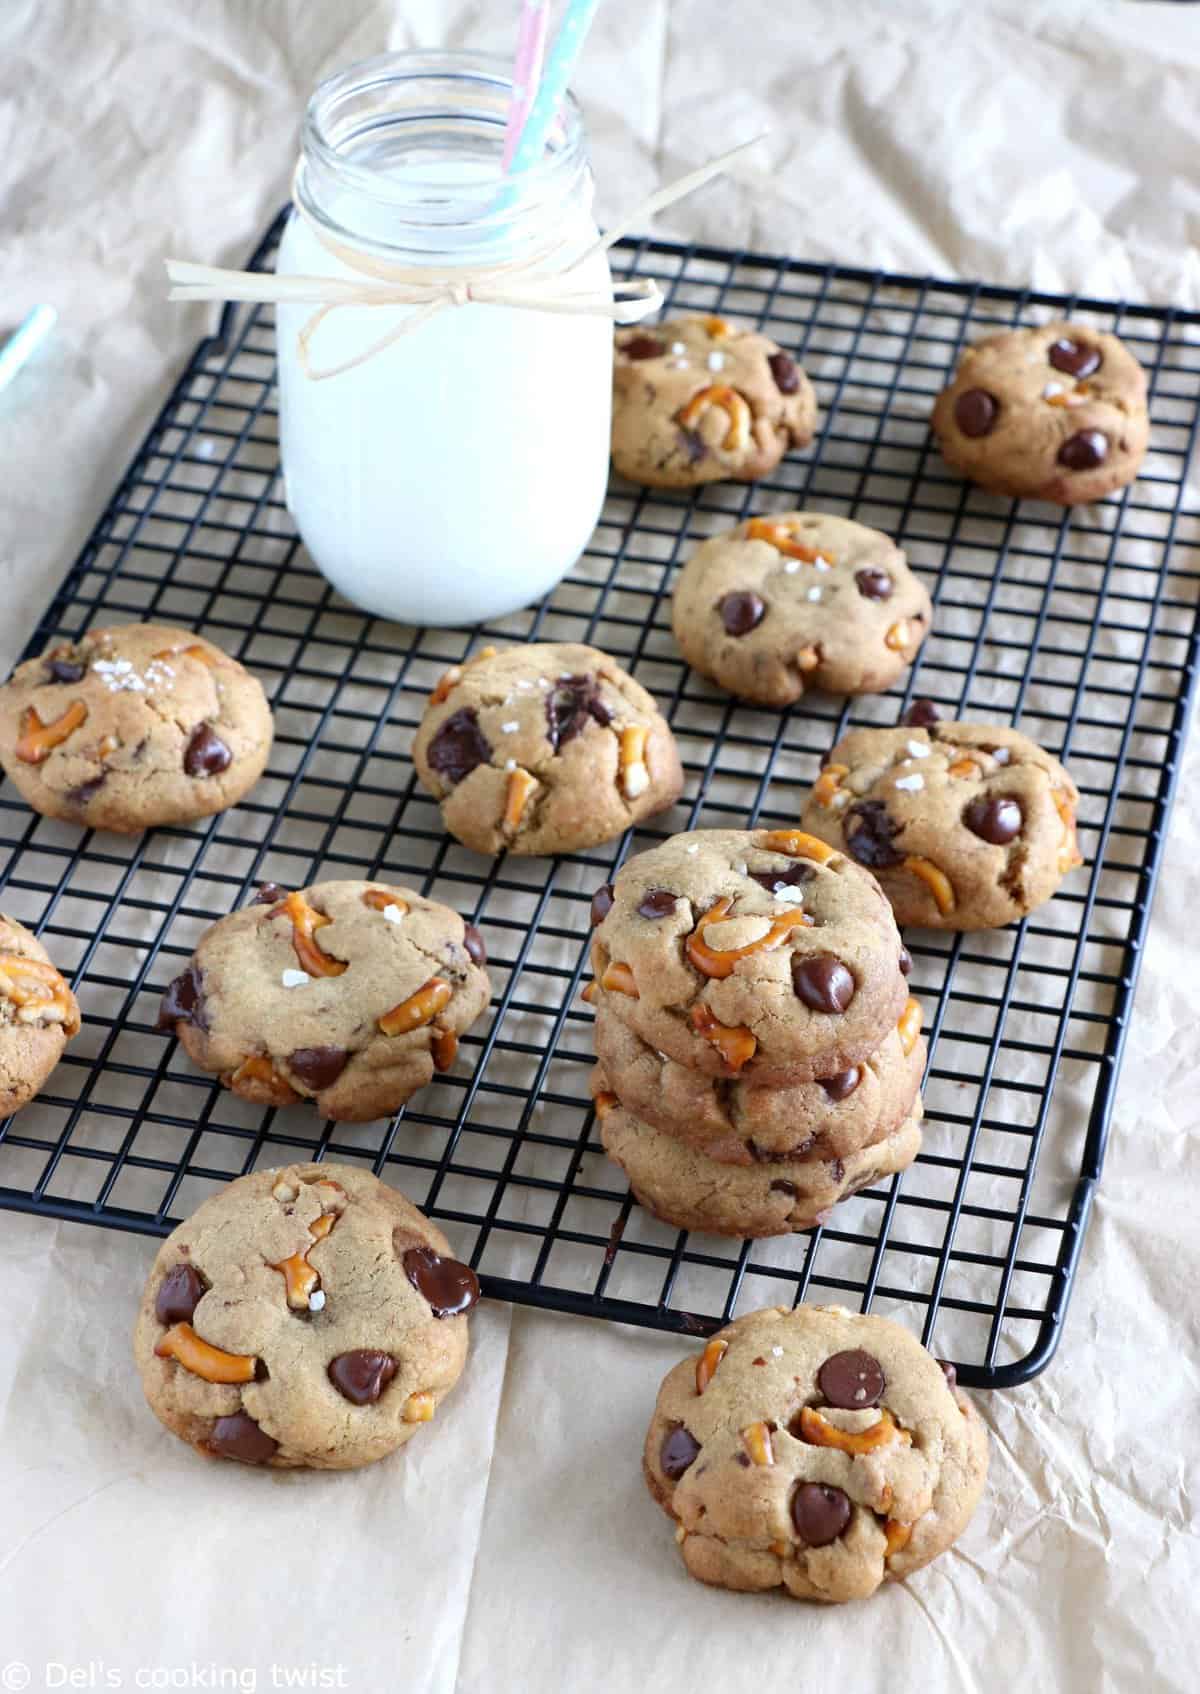 Salted Caramel Chocolate Chip Cookies - Sally's Baking Addiction